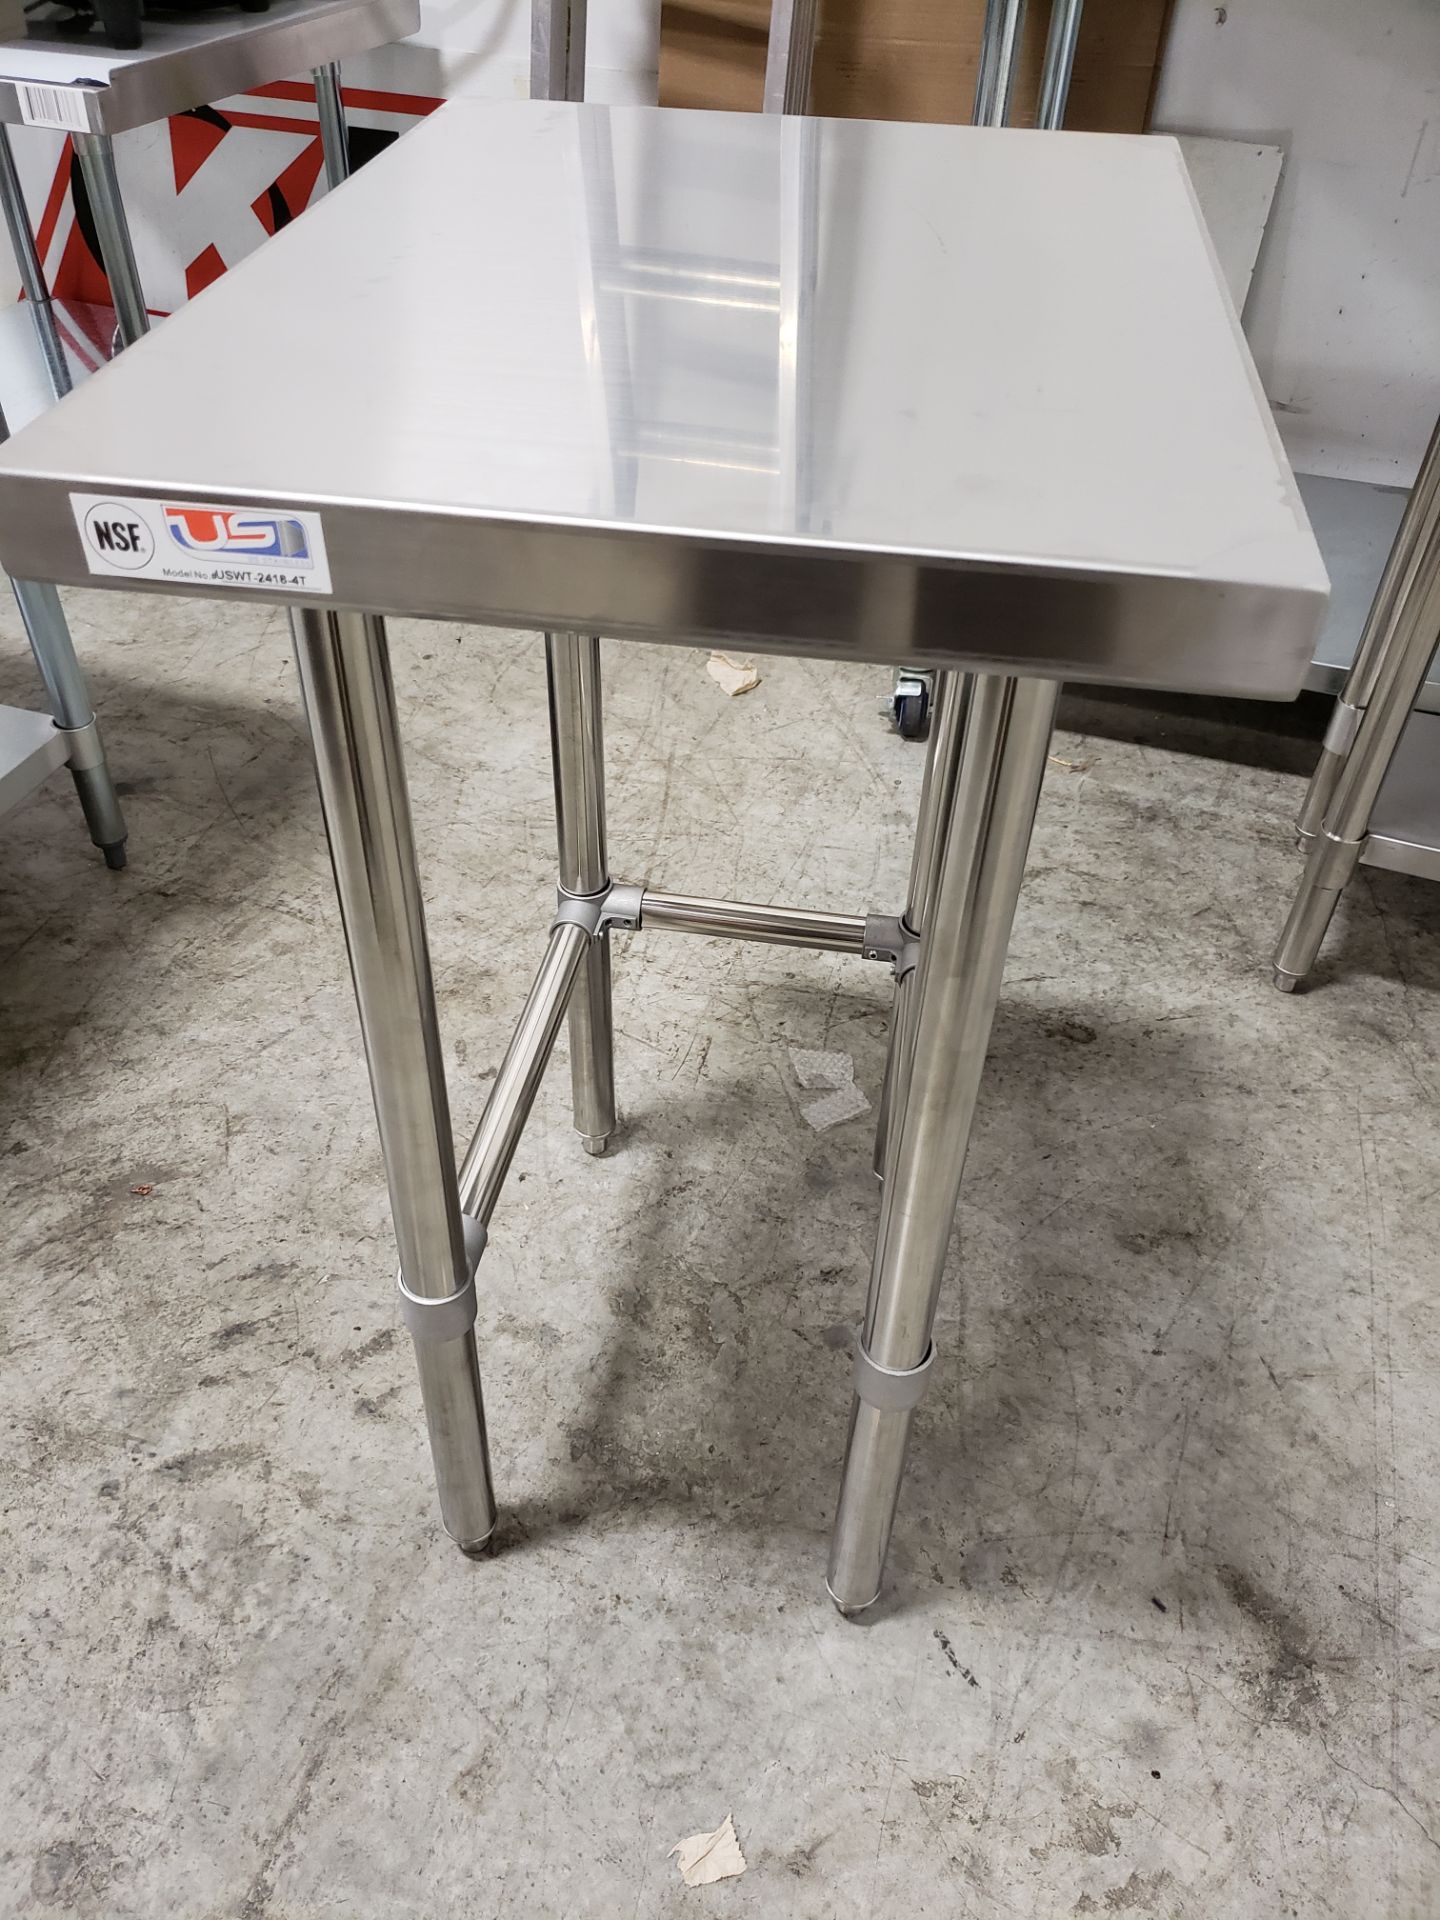 18" x 24" All Stainless Work Table with Tube Base Legs - 34" High